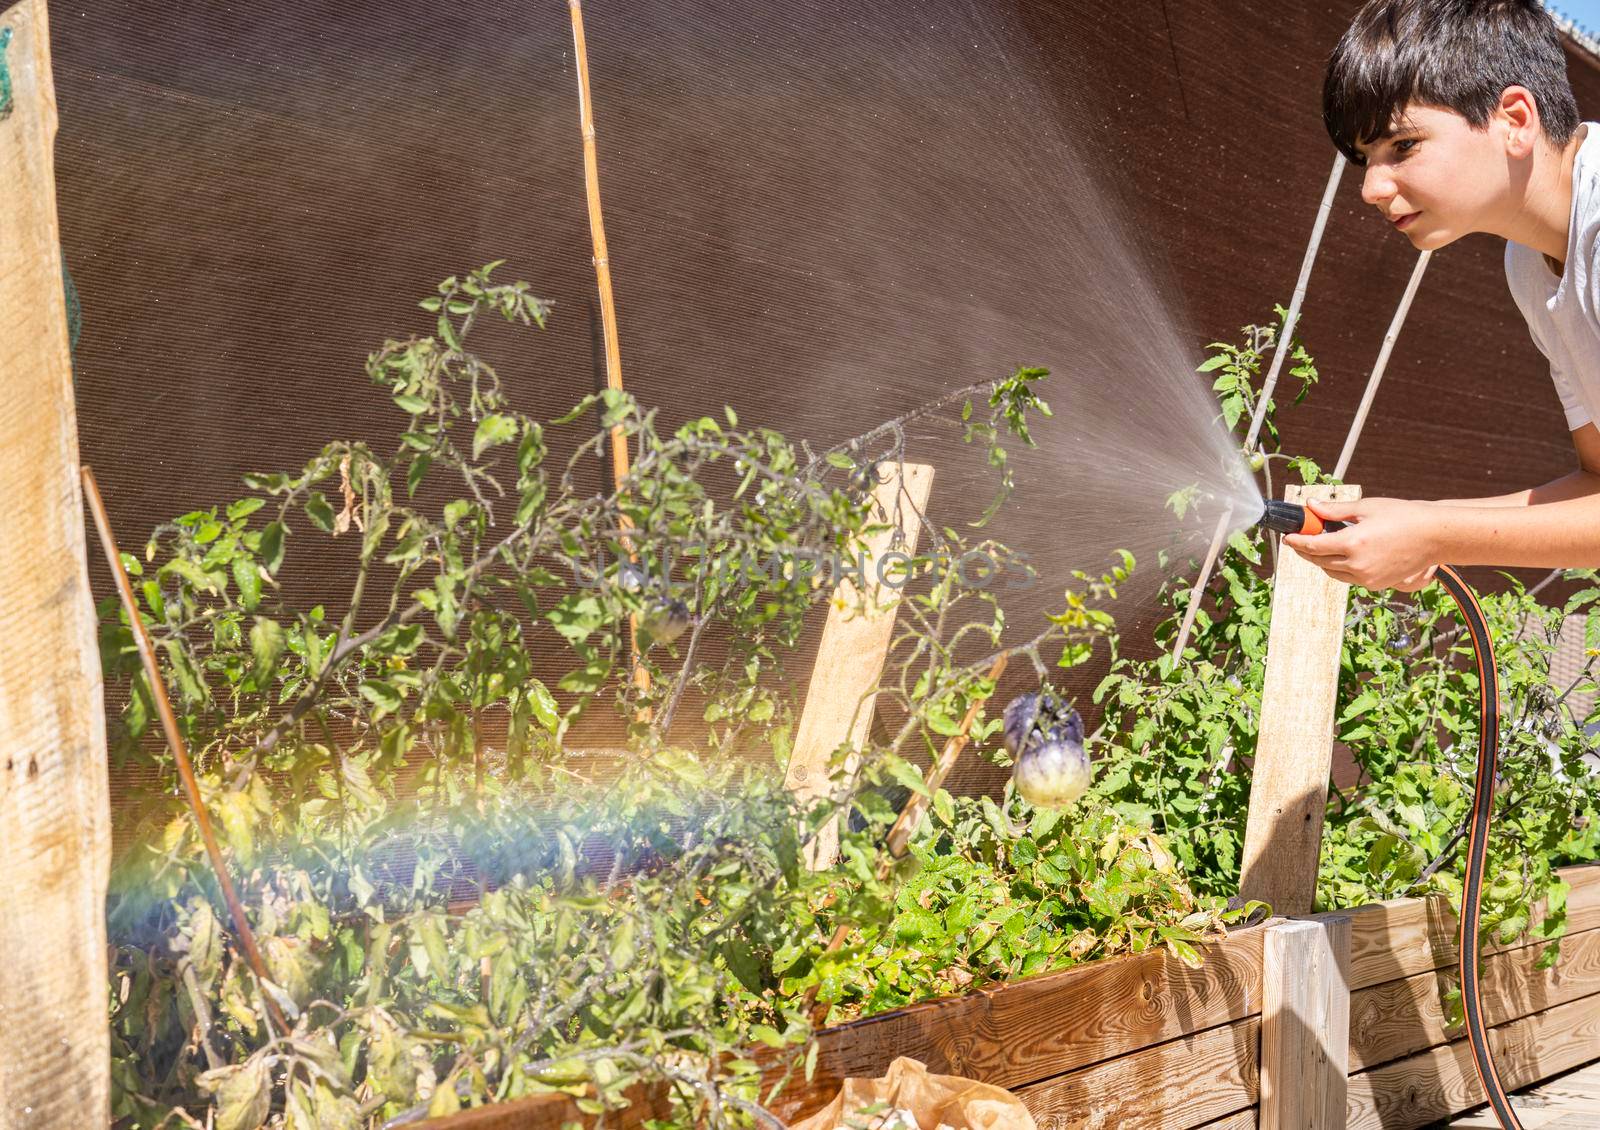 Boy watering the vegetable and tomatoes garden. Growth concept. Healthy lifestyle and sustainability by papatonic